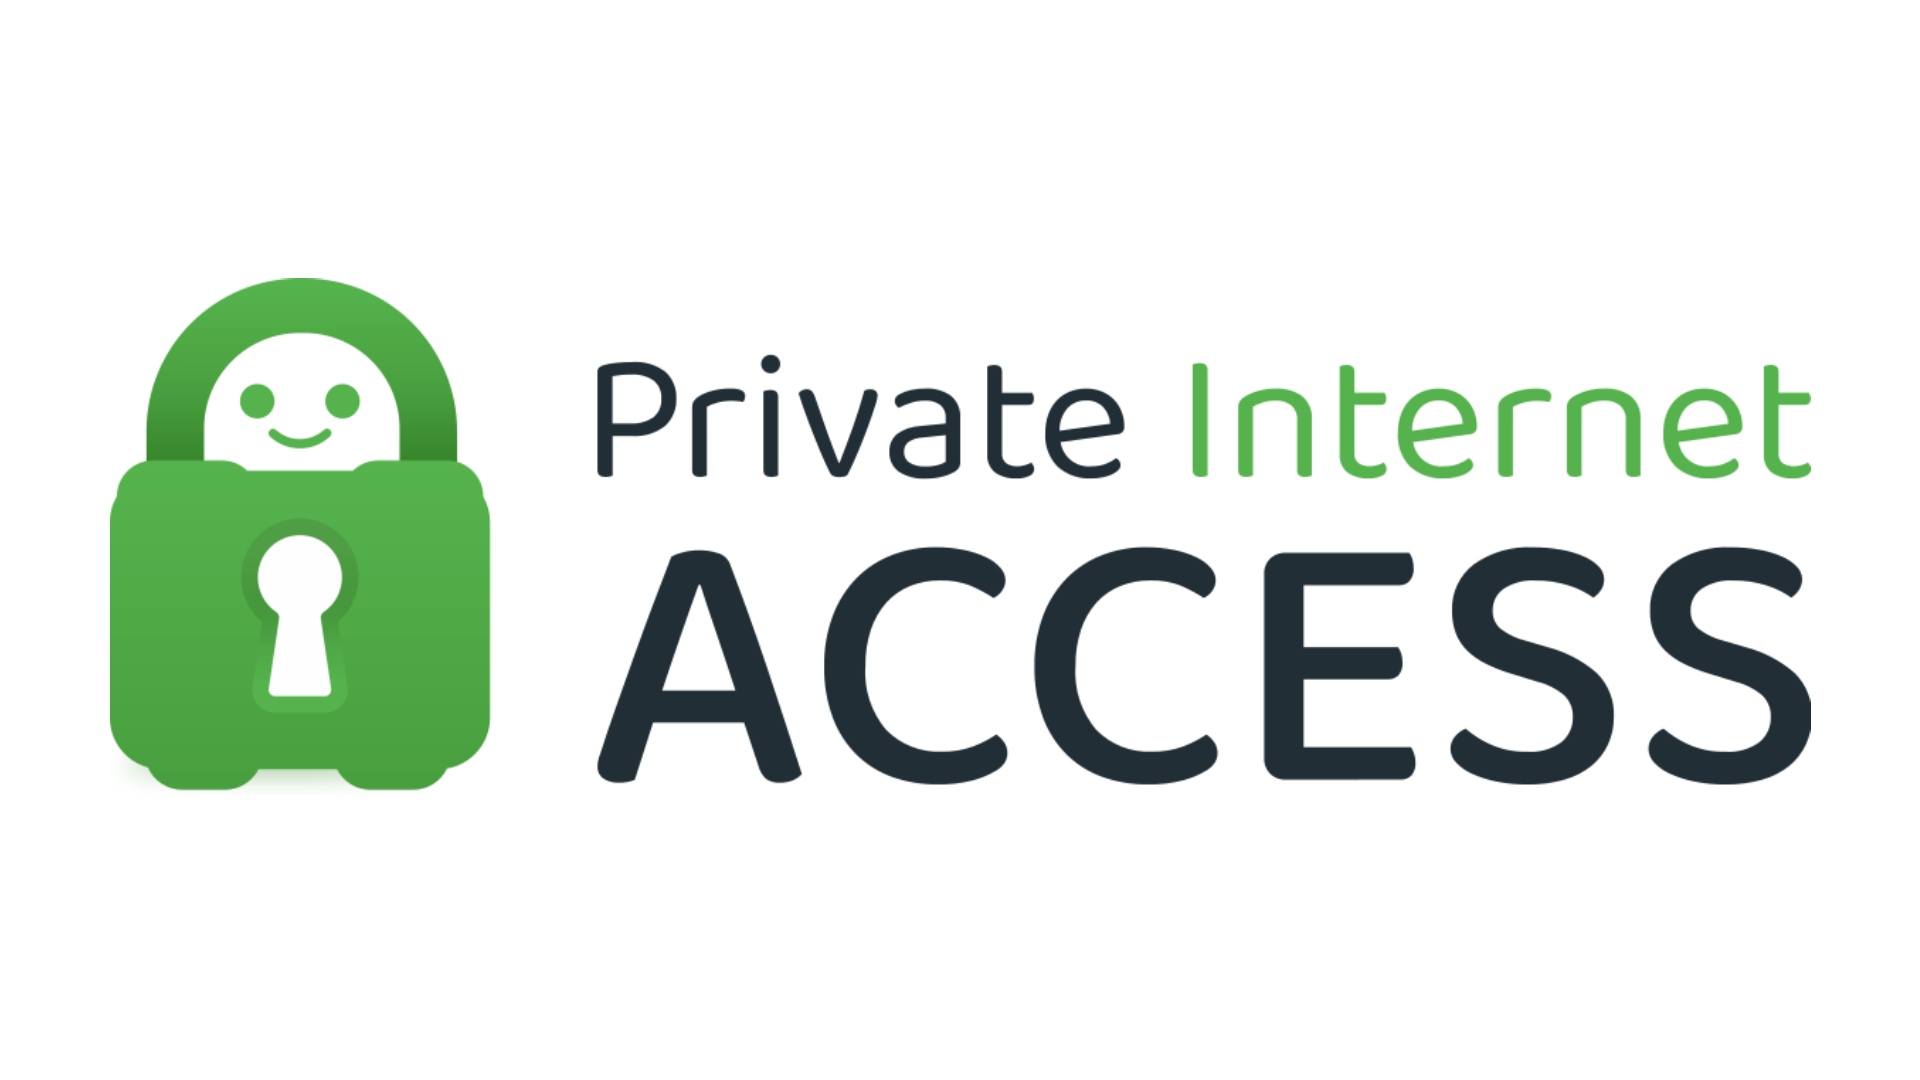 VPN deals: Private Internet Access: image shows the company's logo.